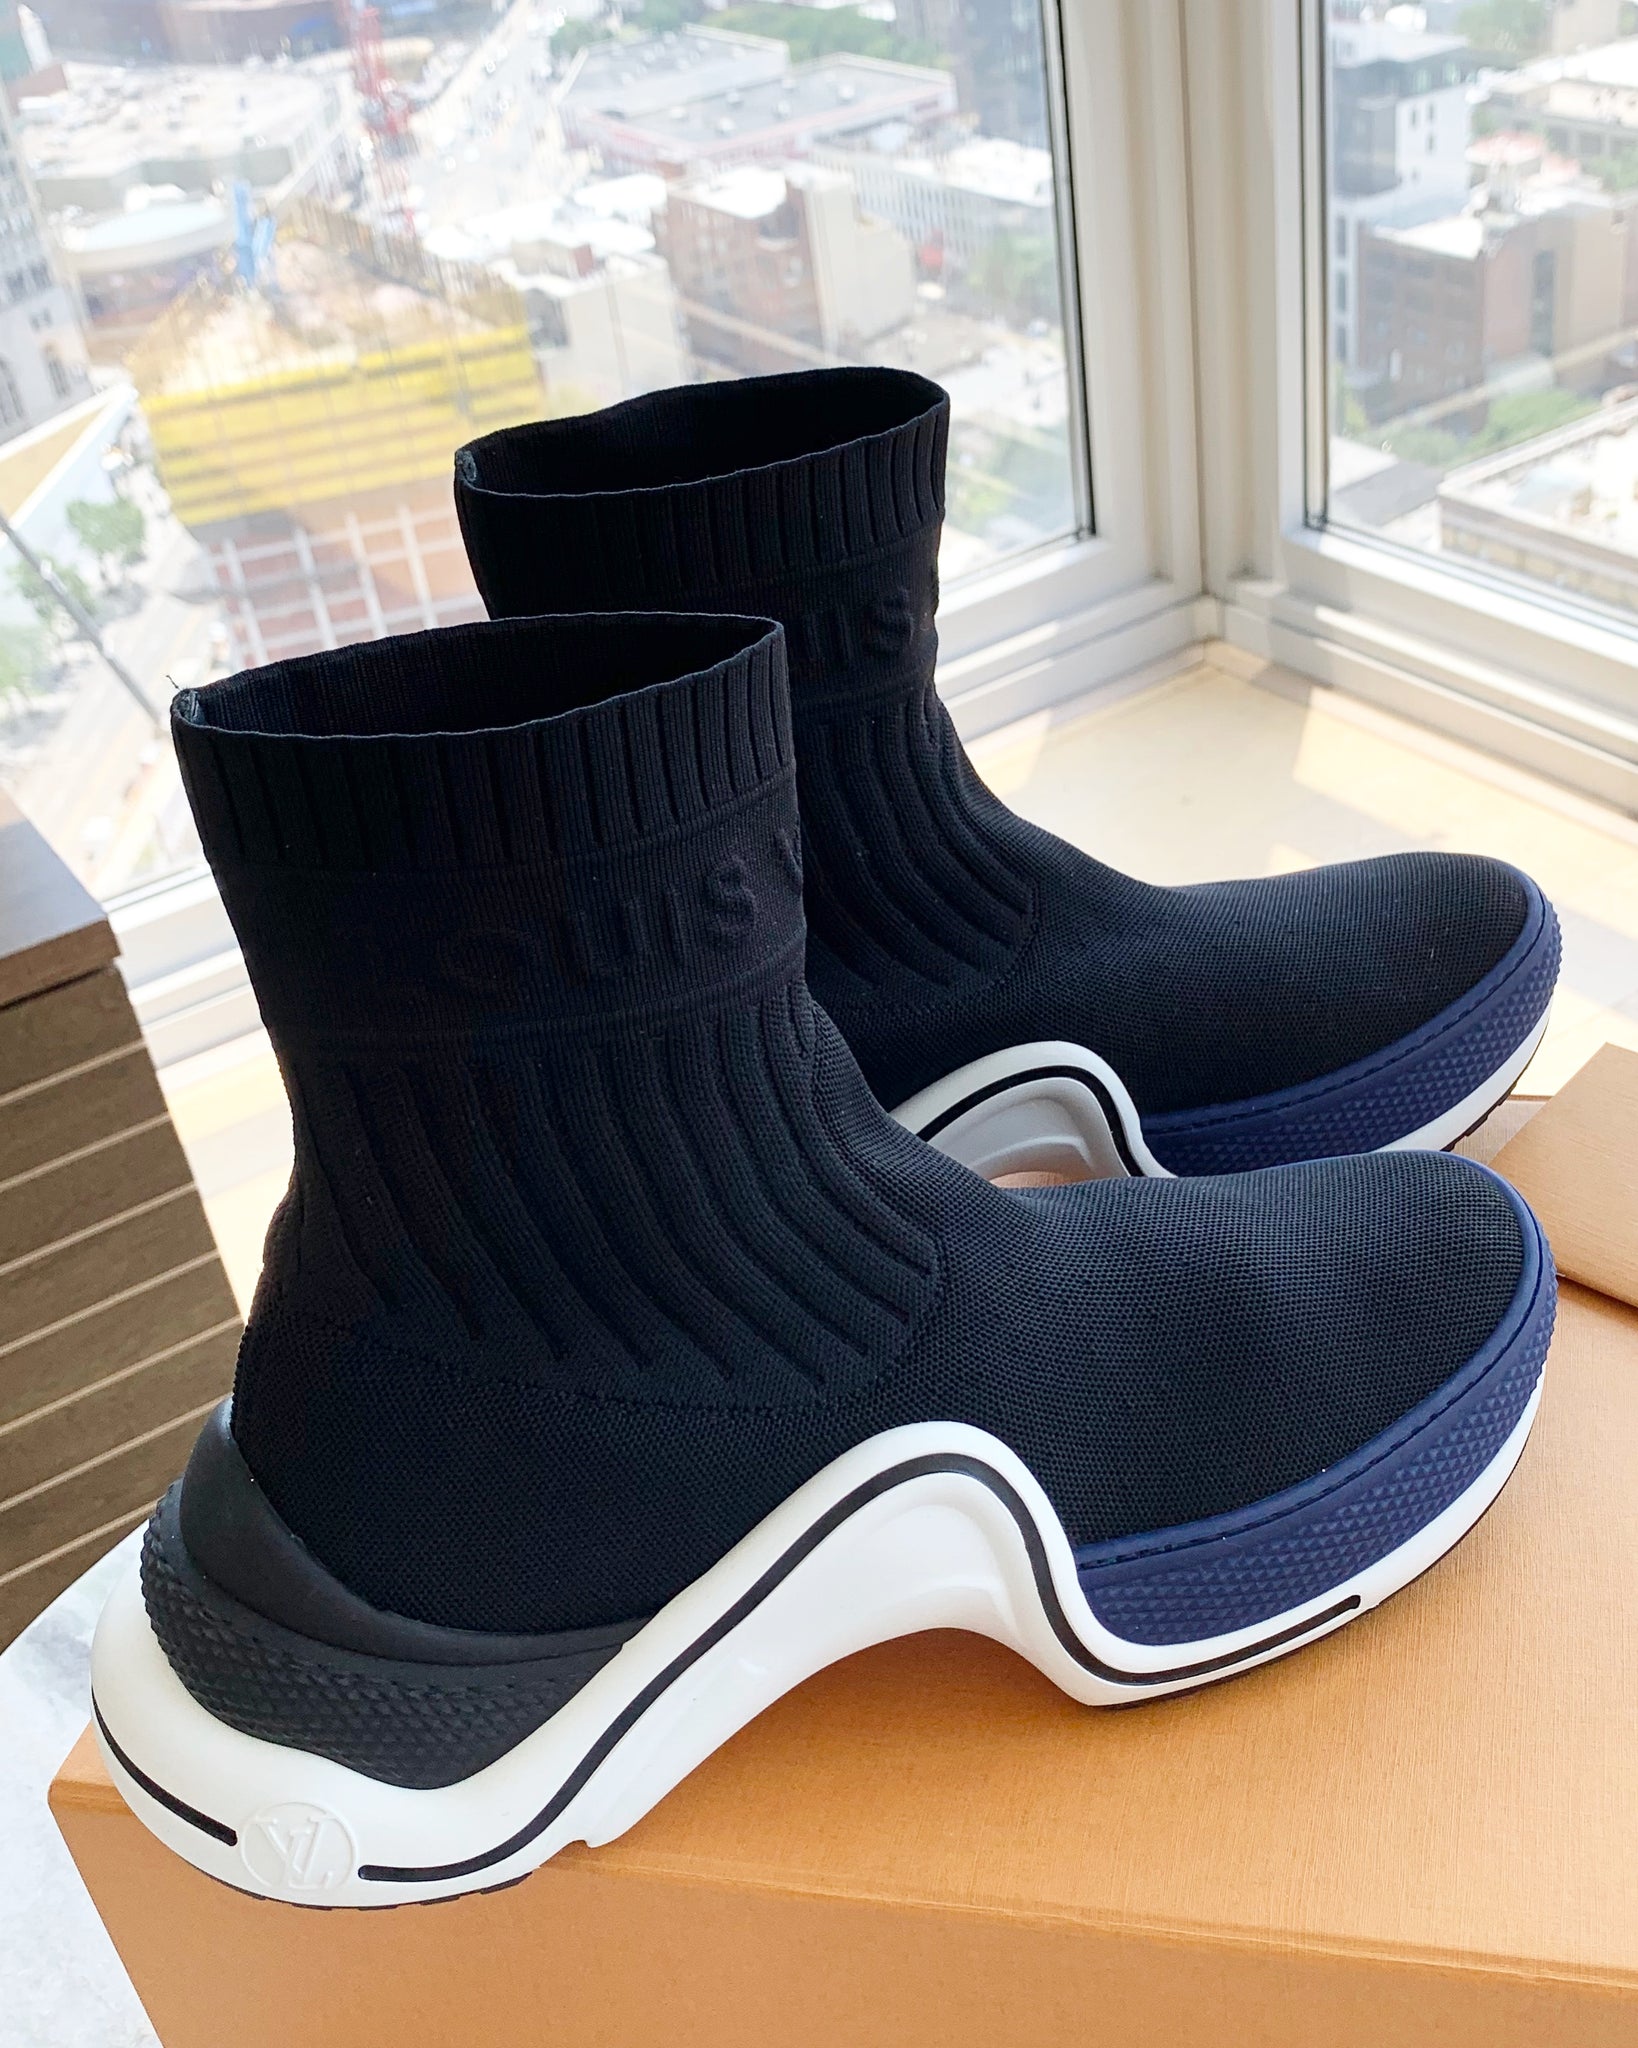 Louis Vuitton Archlight Sneakers Get Made Into Thigh-High Boots